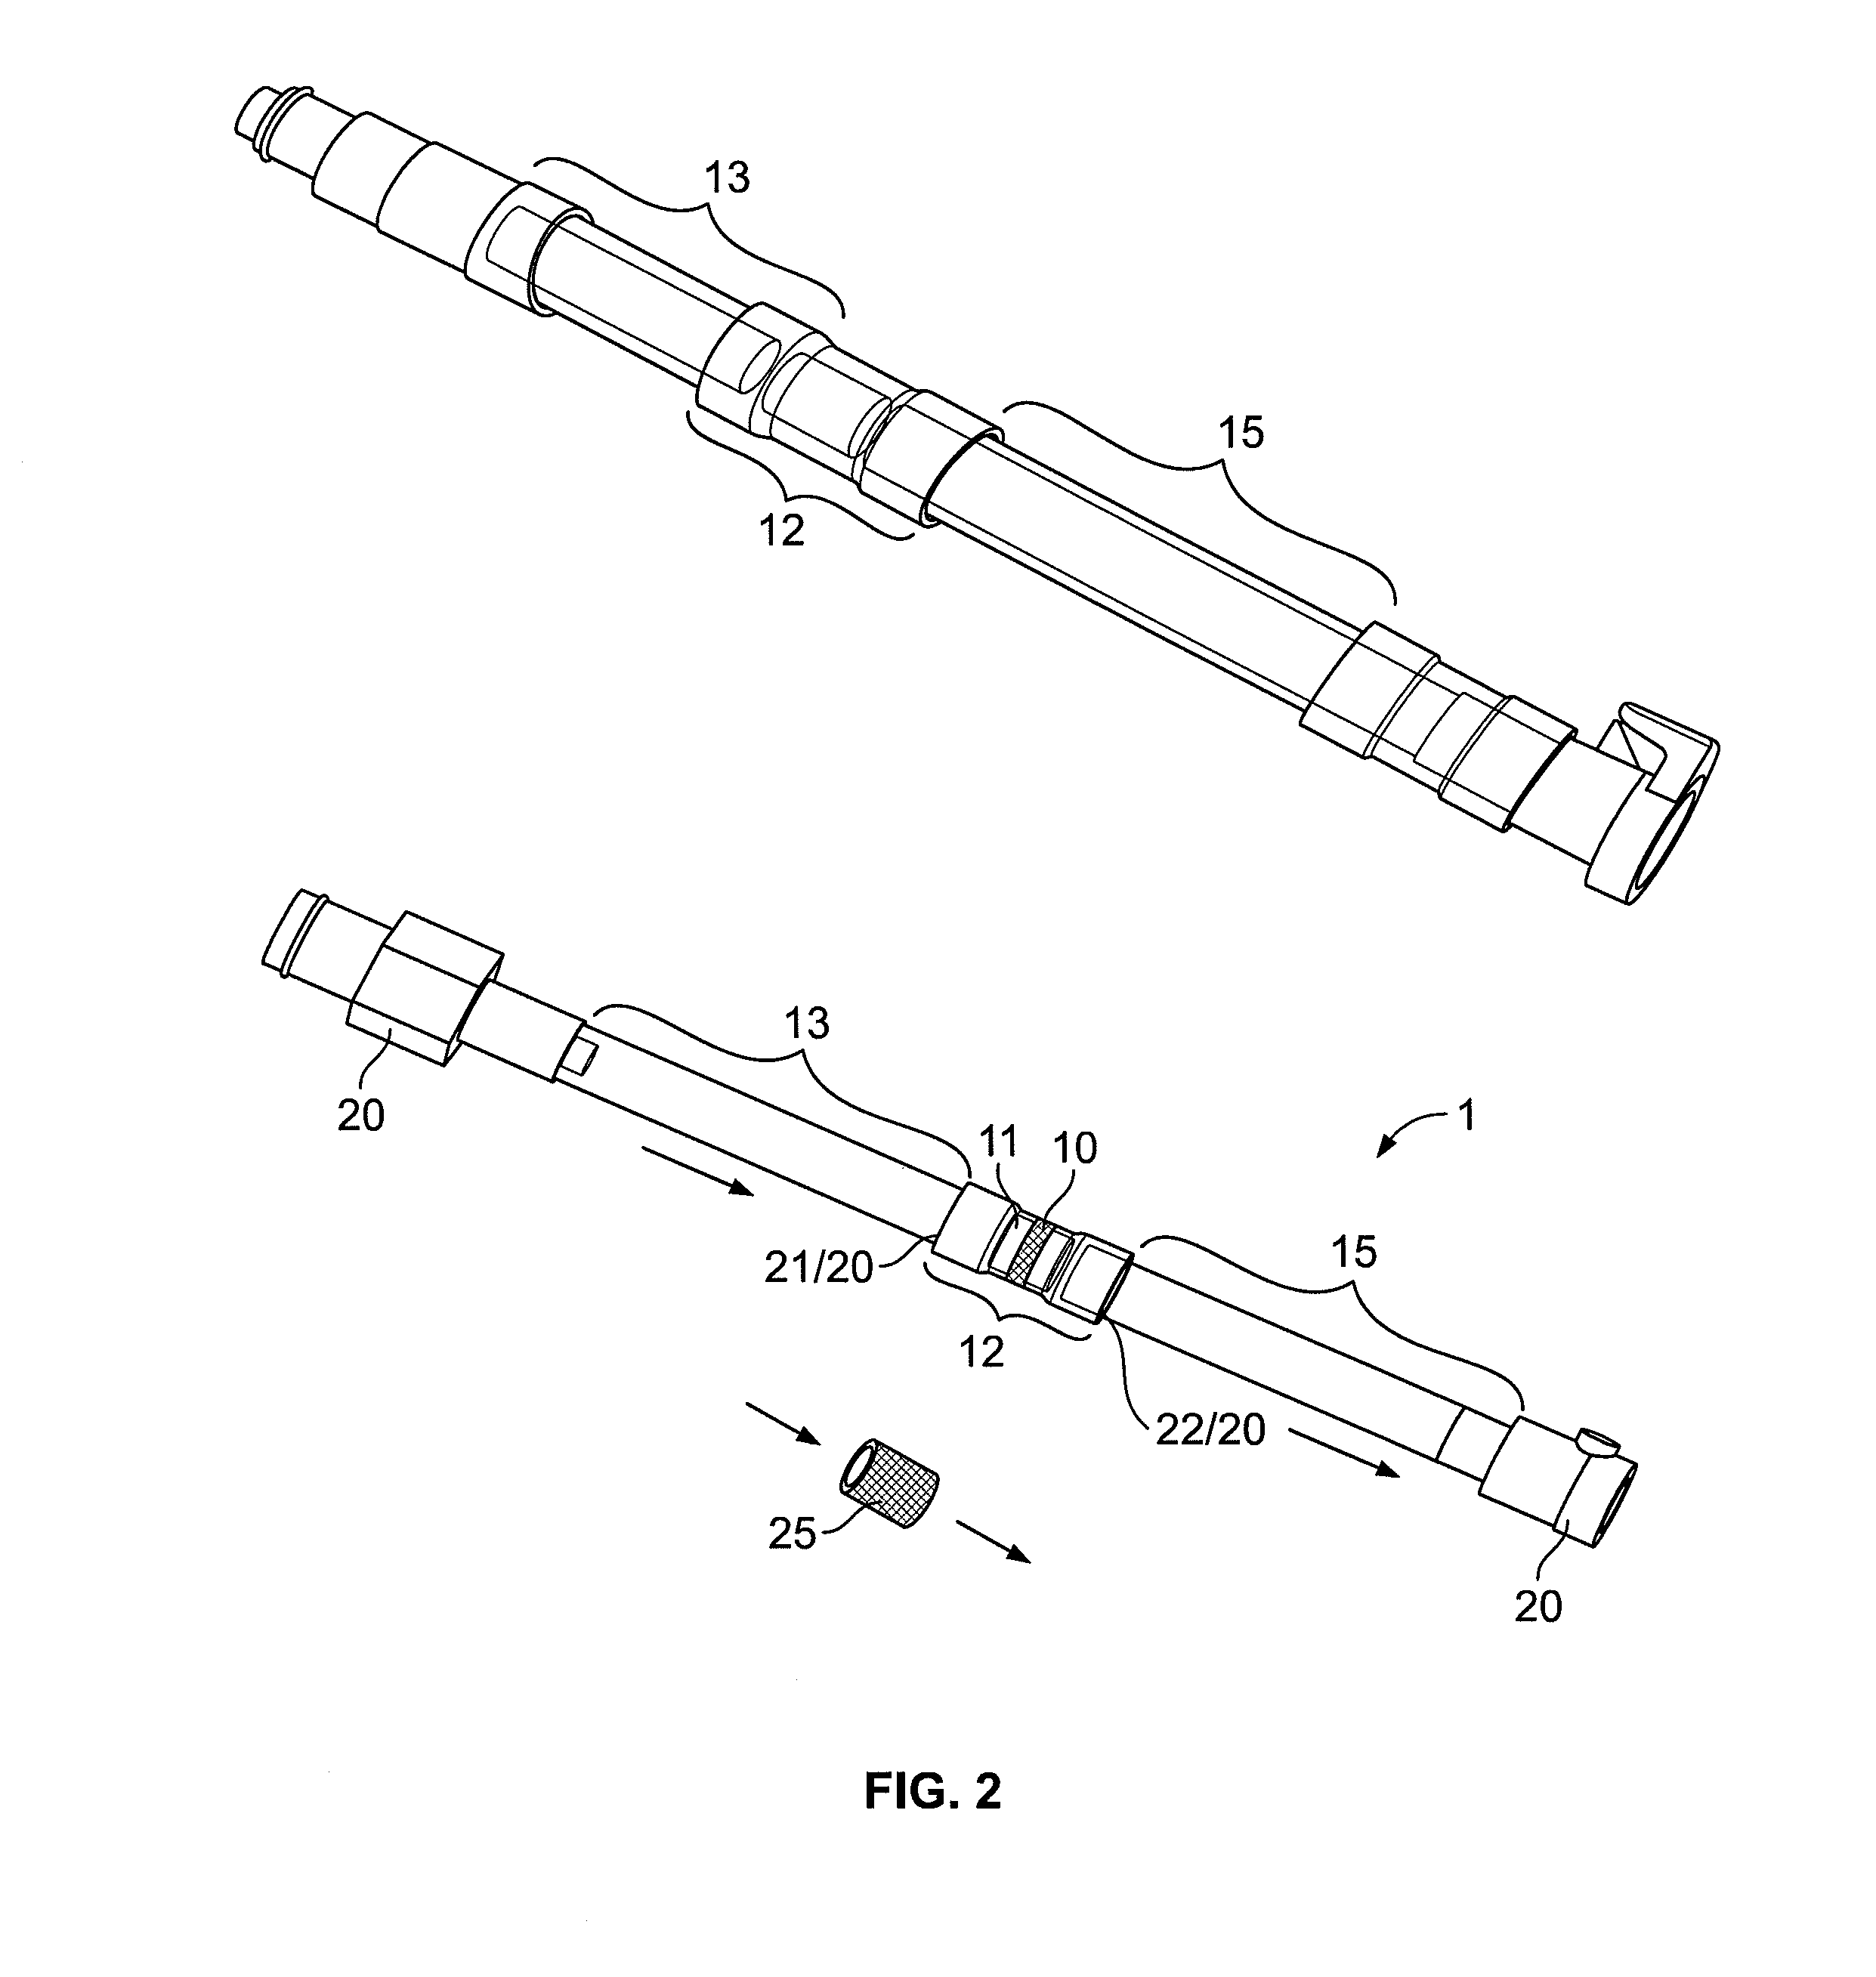 Bioreactor device for exposing a cell culture to a fluid shear force imparted by a fluid flow